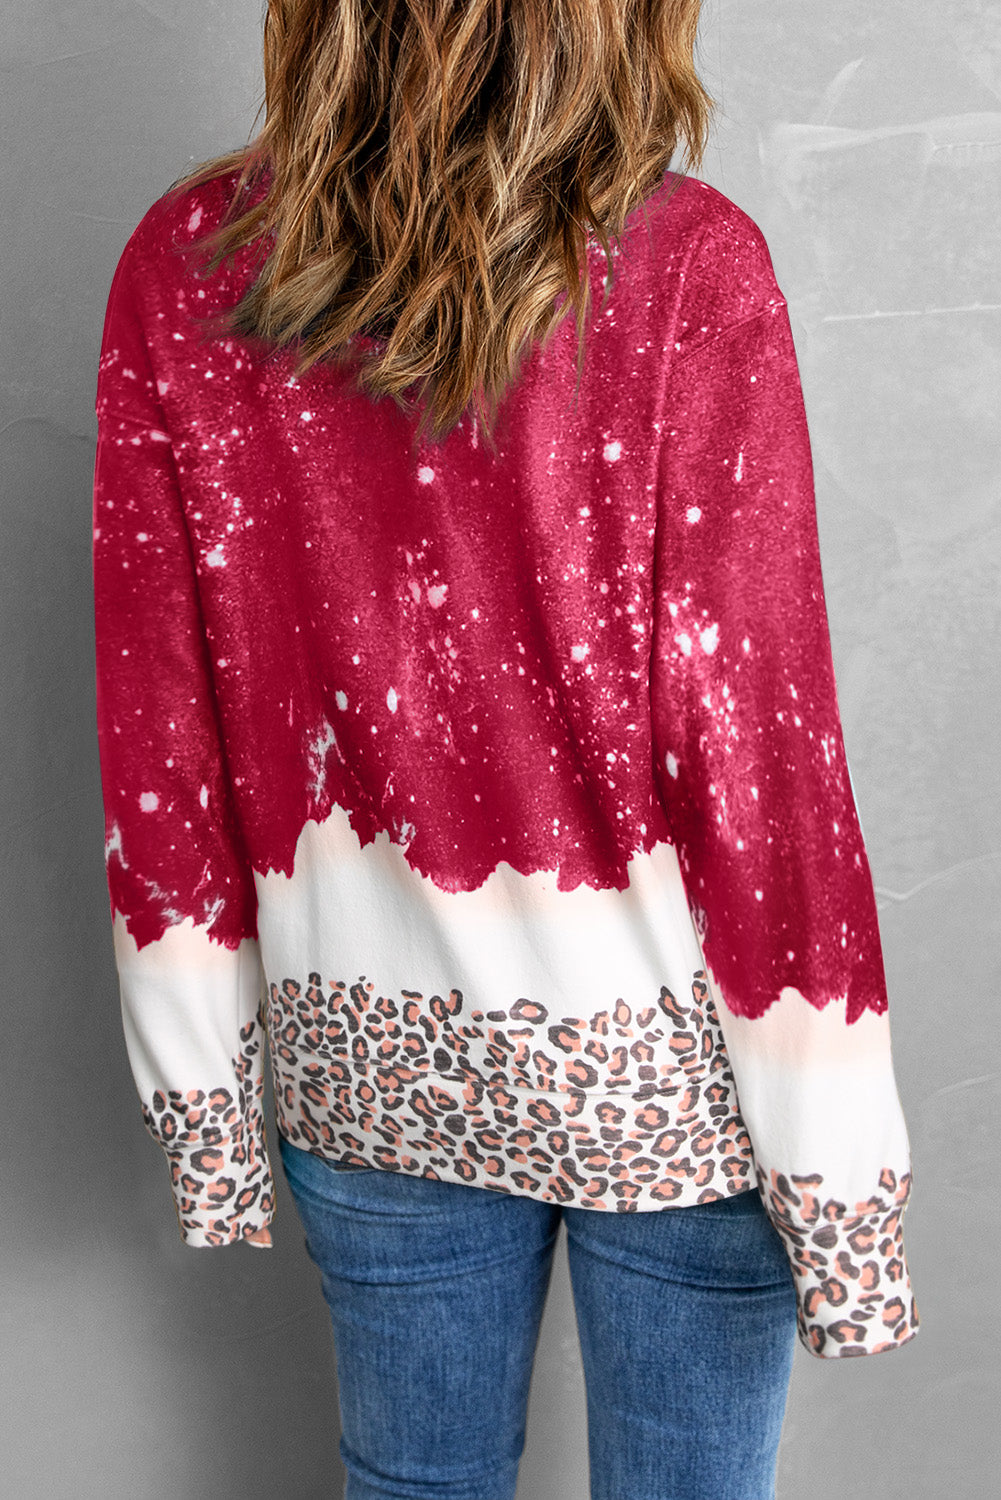 Red Leopard Bleached Heart Print Graphic Pullover Sweatshirt